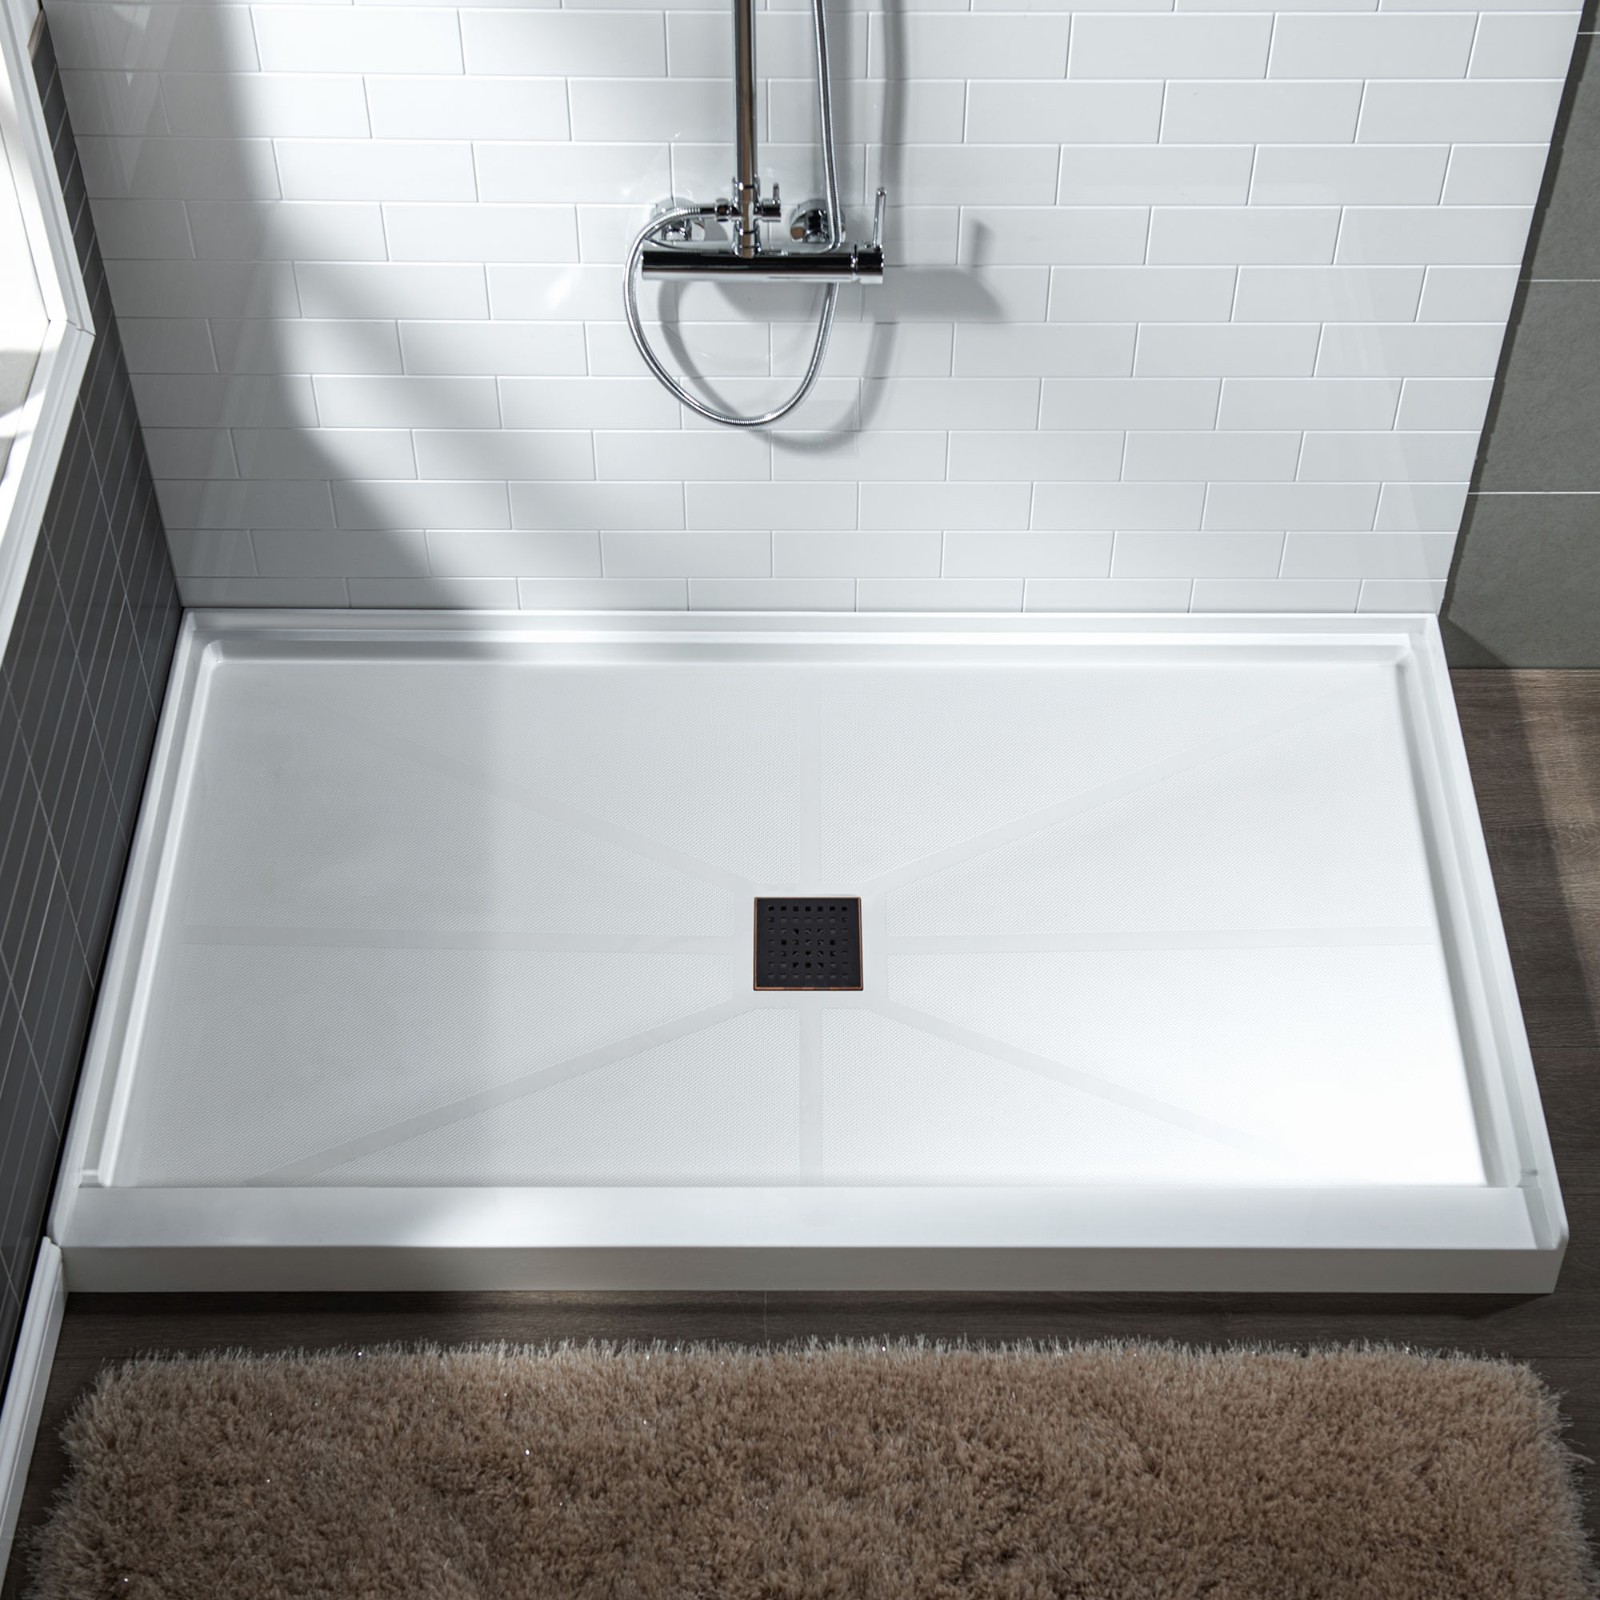  WOODBRIDGE SBR4836-1000C-ORB SolidSurface Shower Base with Recessed Trench Side Including Oil Rubbed Bronze Linear Cover, 48